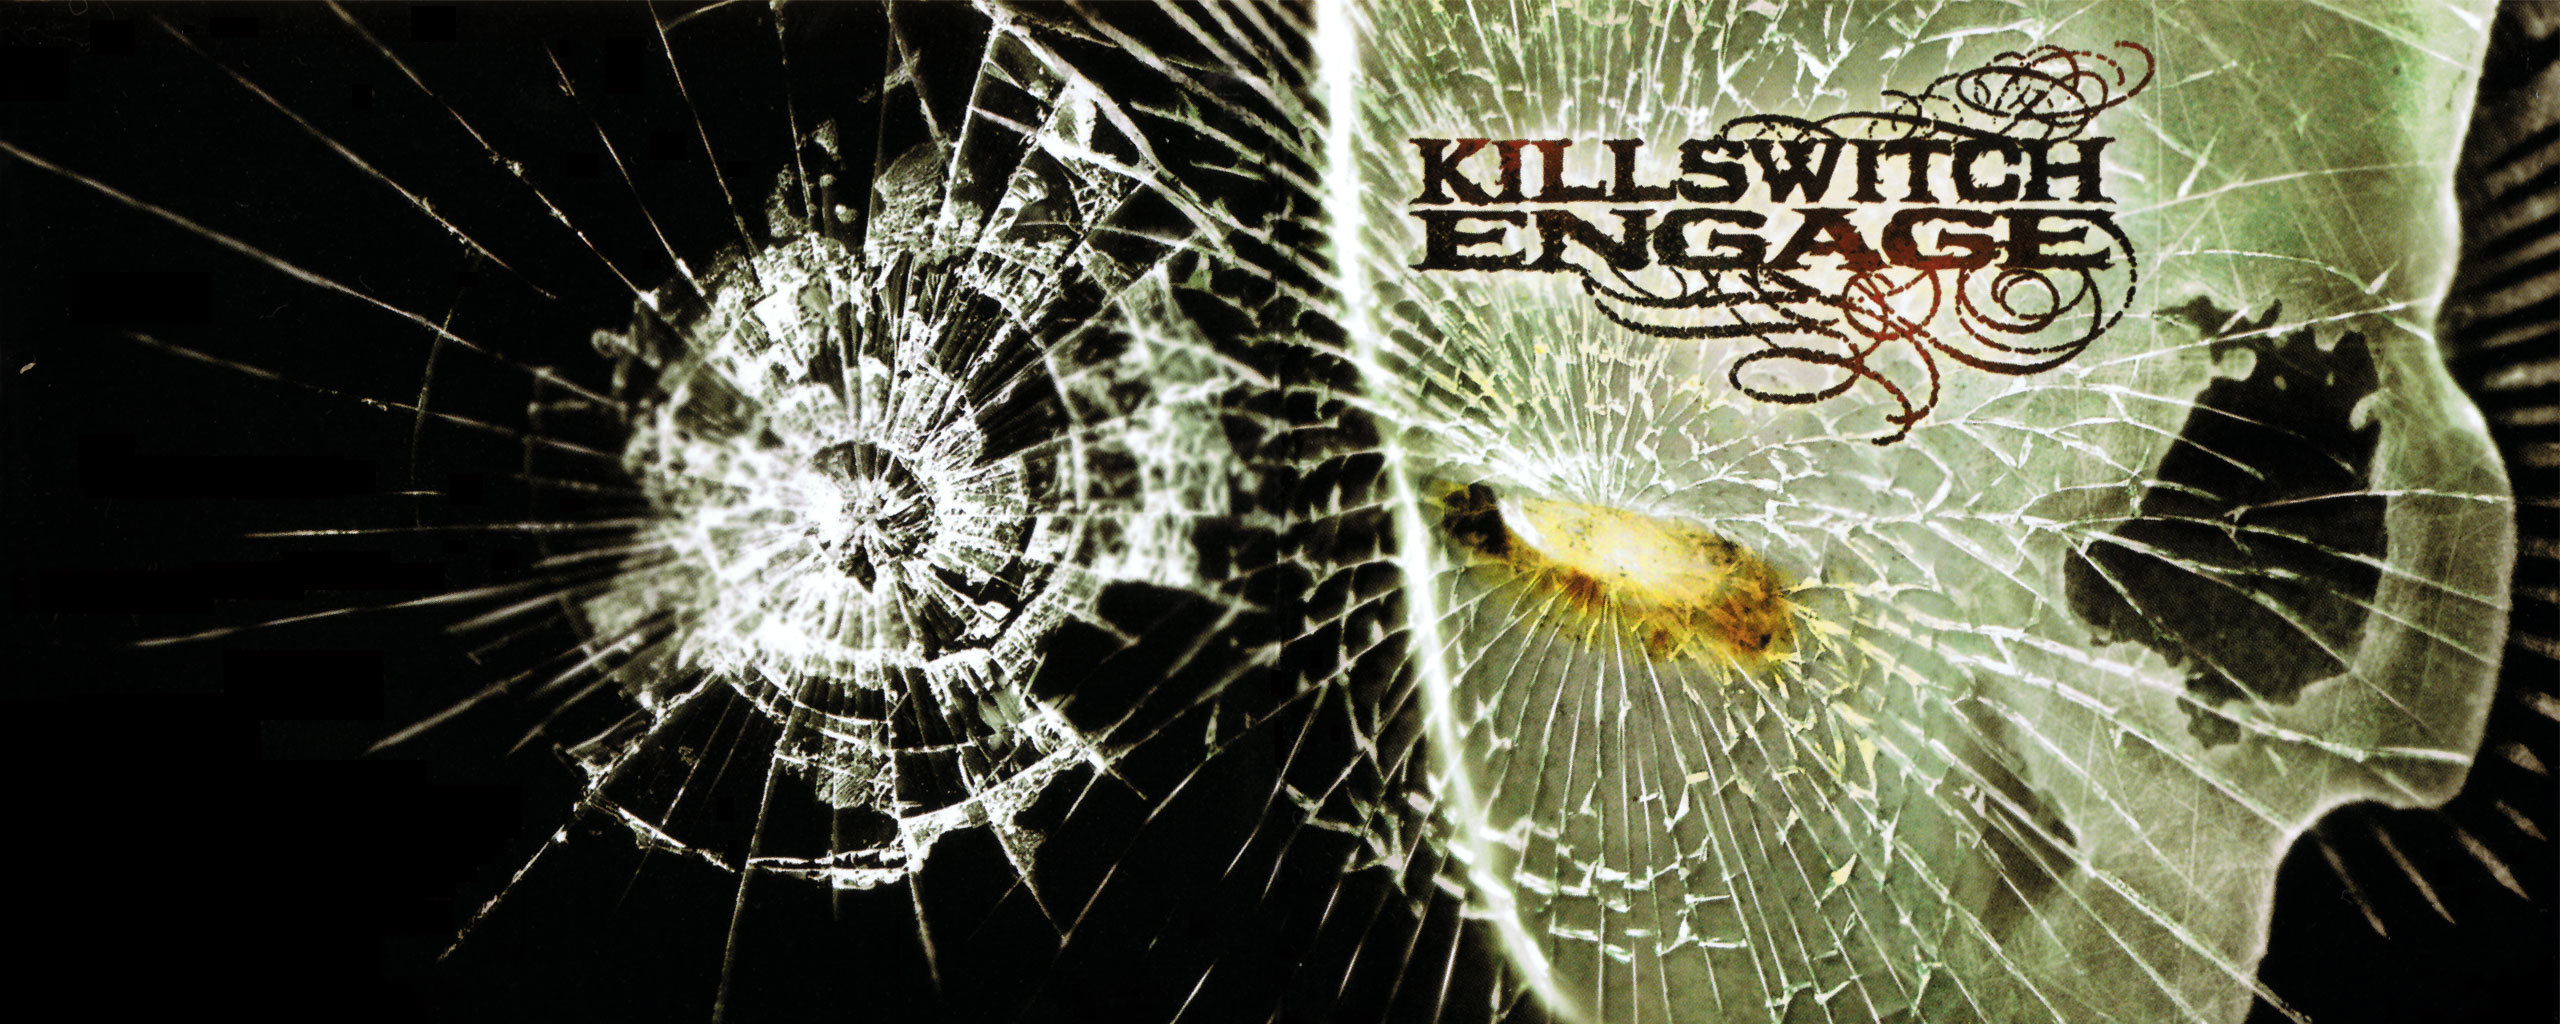 Best Killswitch Engage wallpaper ID:164049 for High Resolution dual screen 2560x1024 desktop